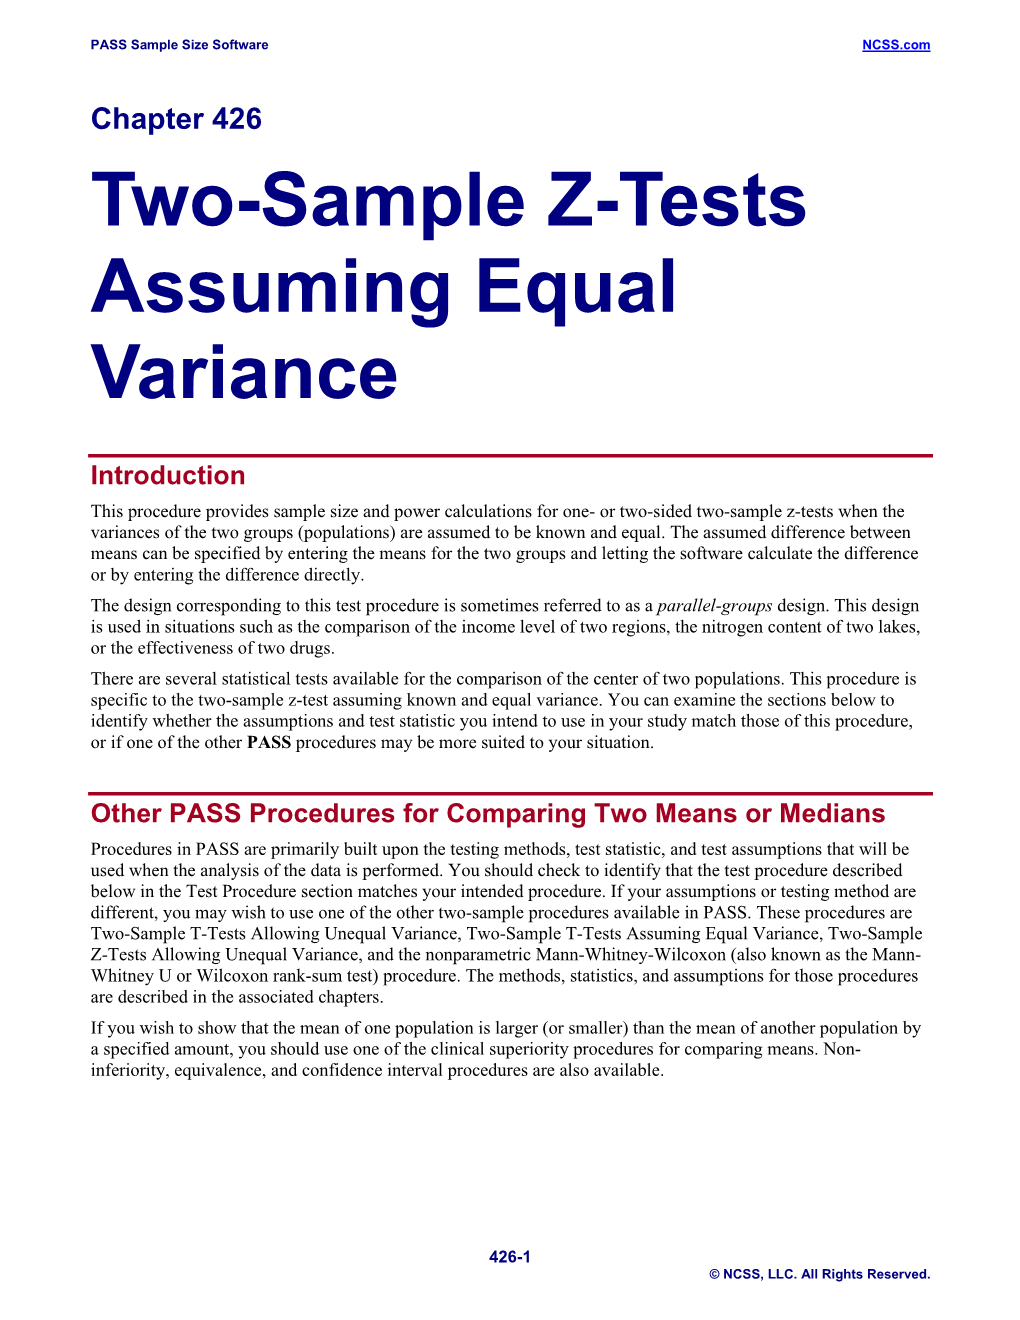 Two-Sample Z-Tests Assuming Equal Variance